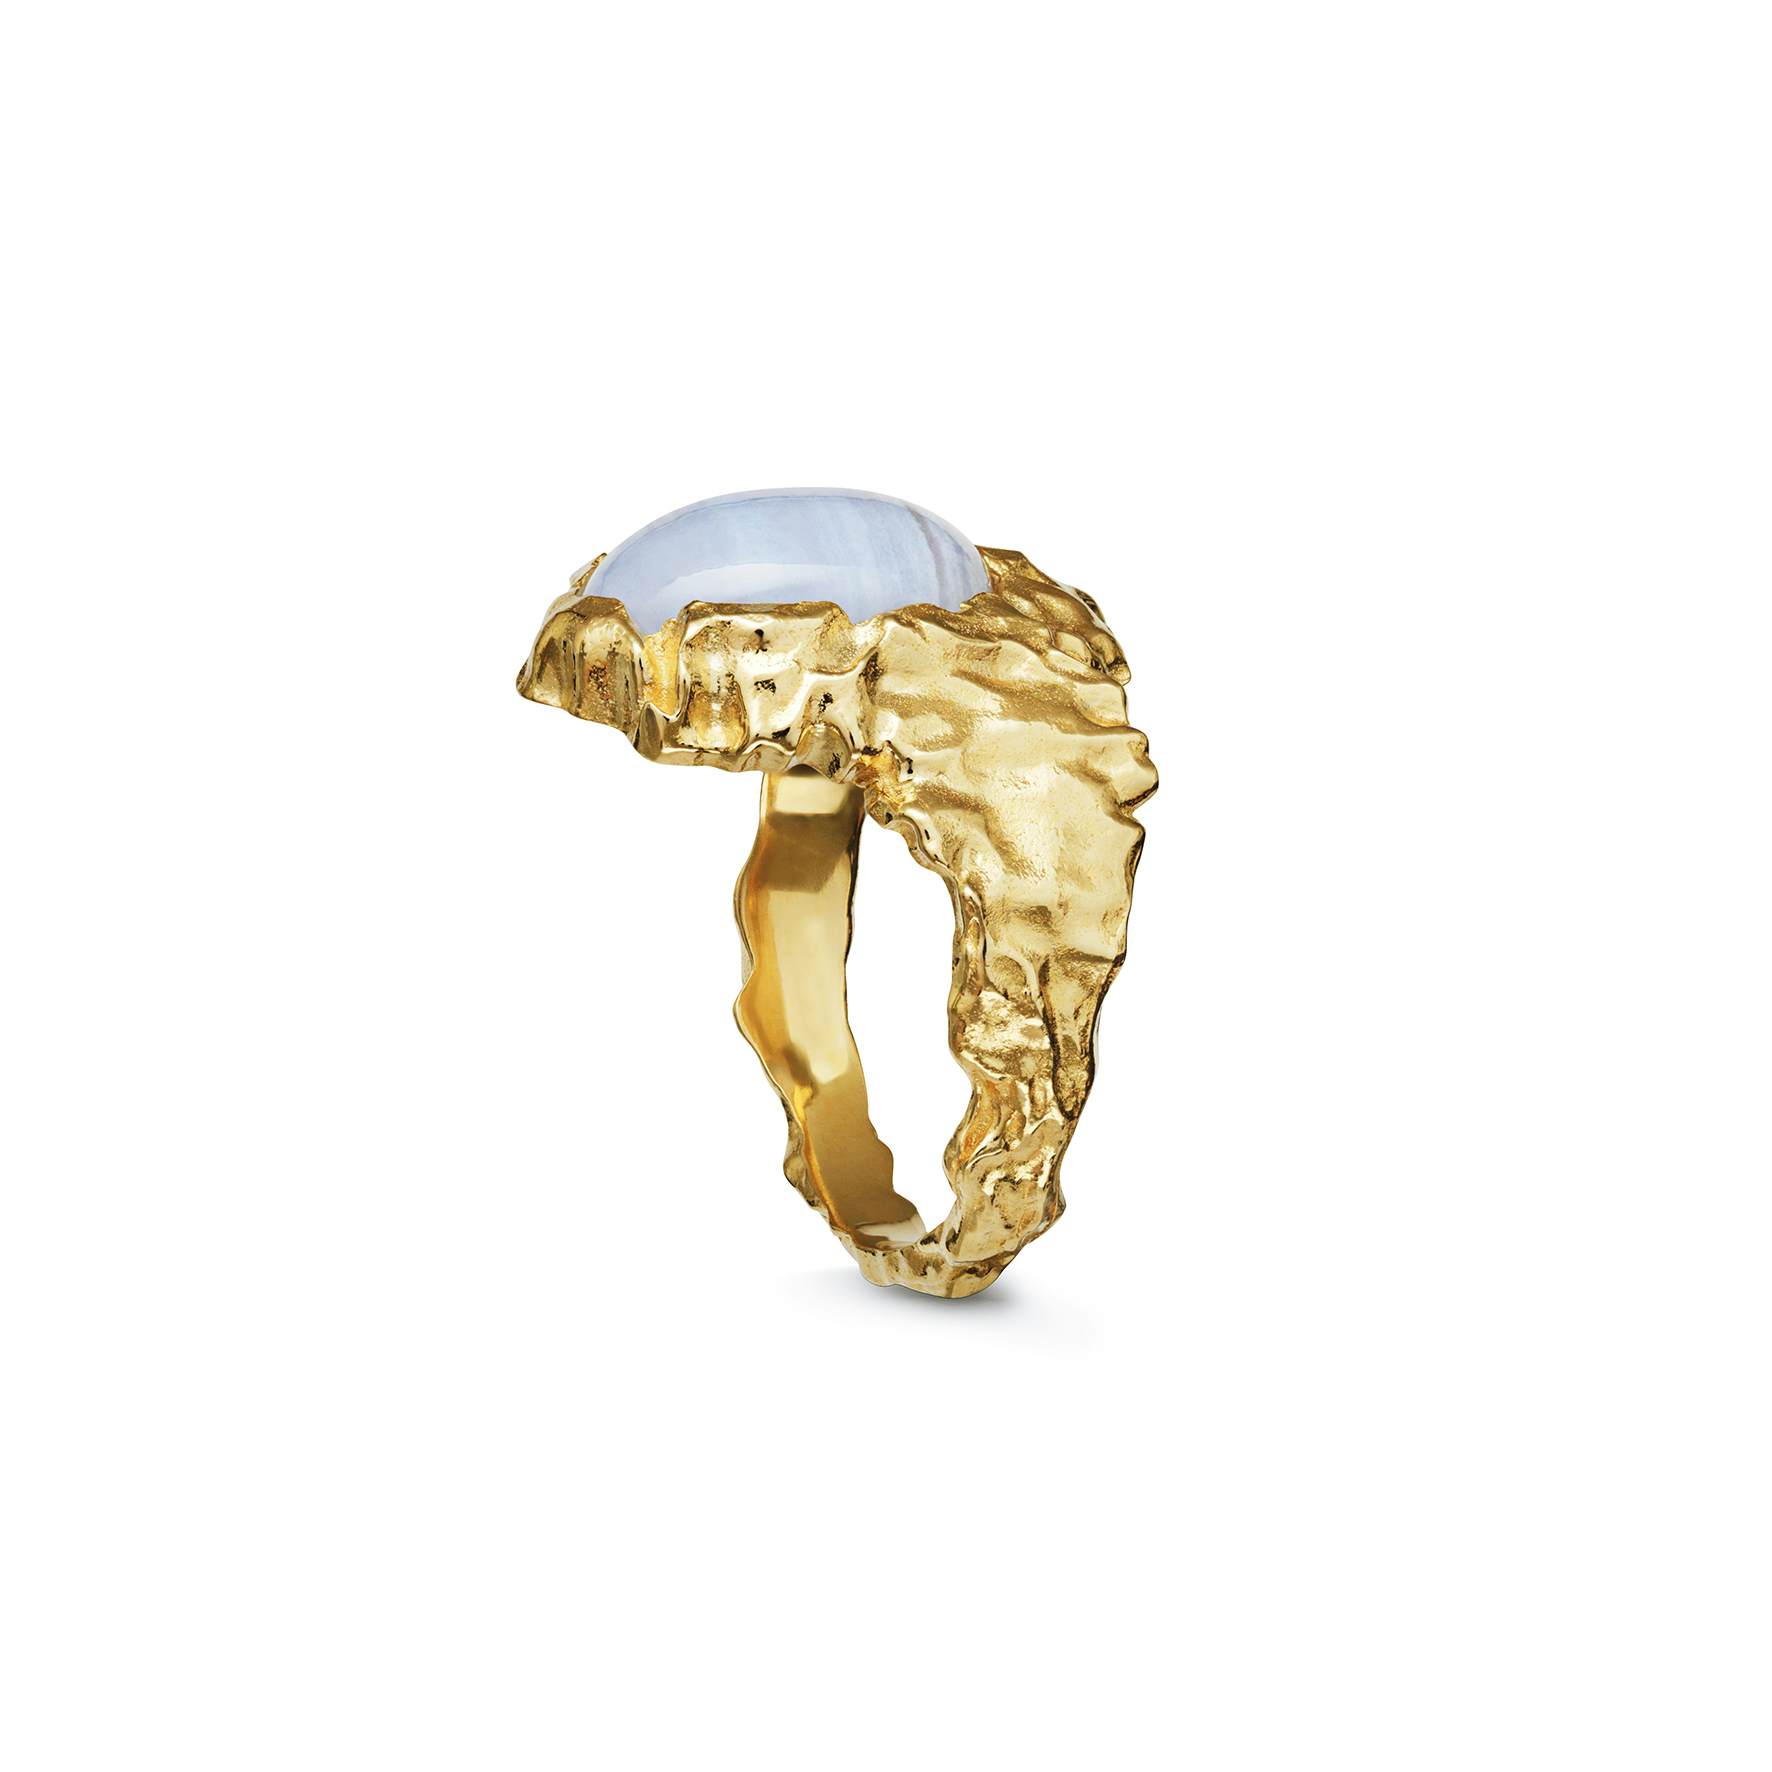 Goddess Ring Blonde Agat from Maanesten in Goldplated-Silver Sterling 925